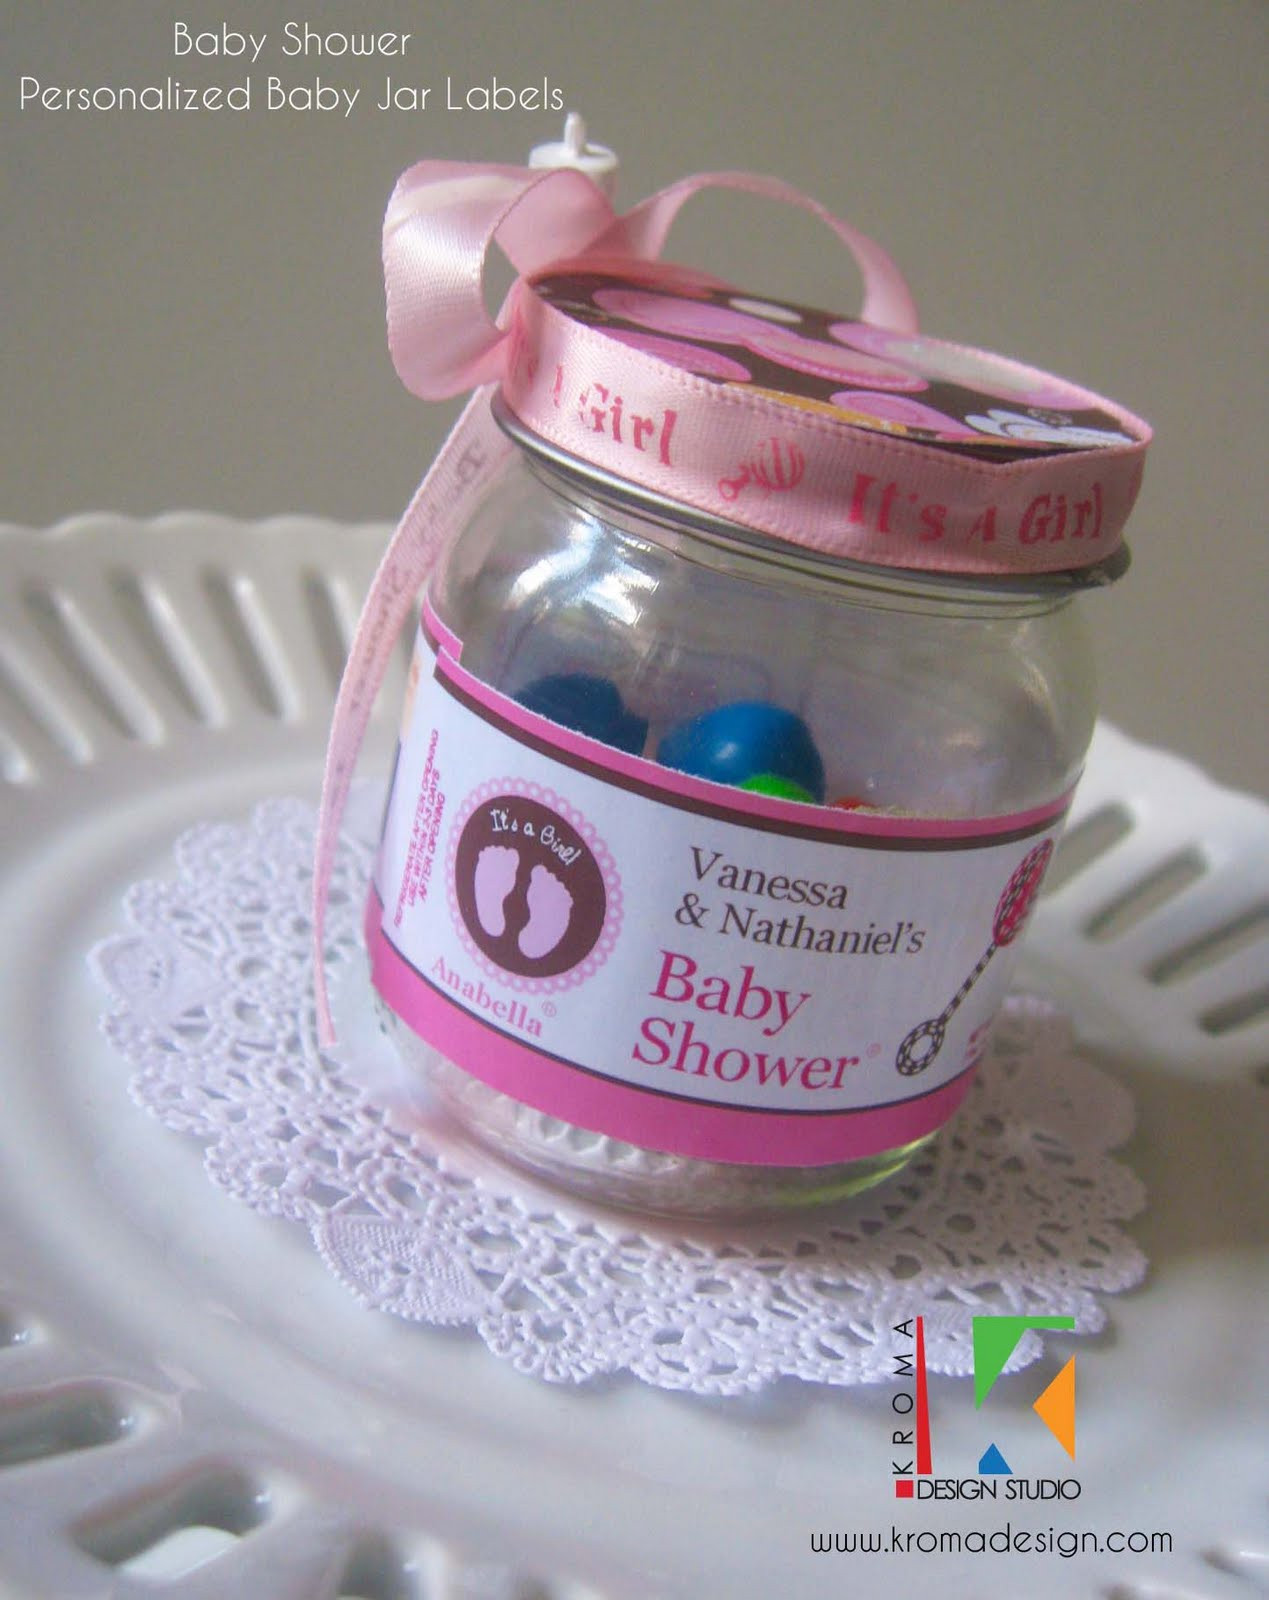 Baby Shower Party Favors Ideas DIY
 Baby Showers DIY Printable Baby Jar Label Favors for